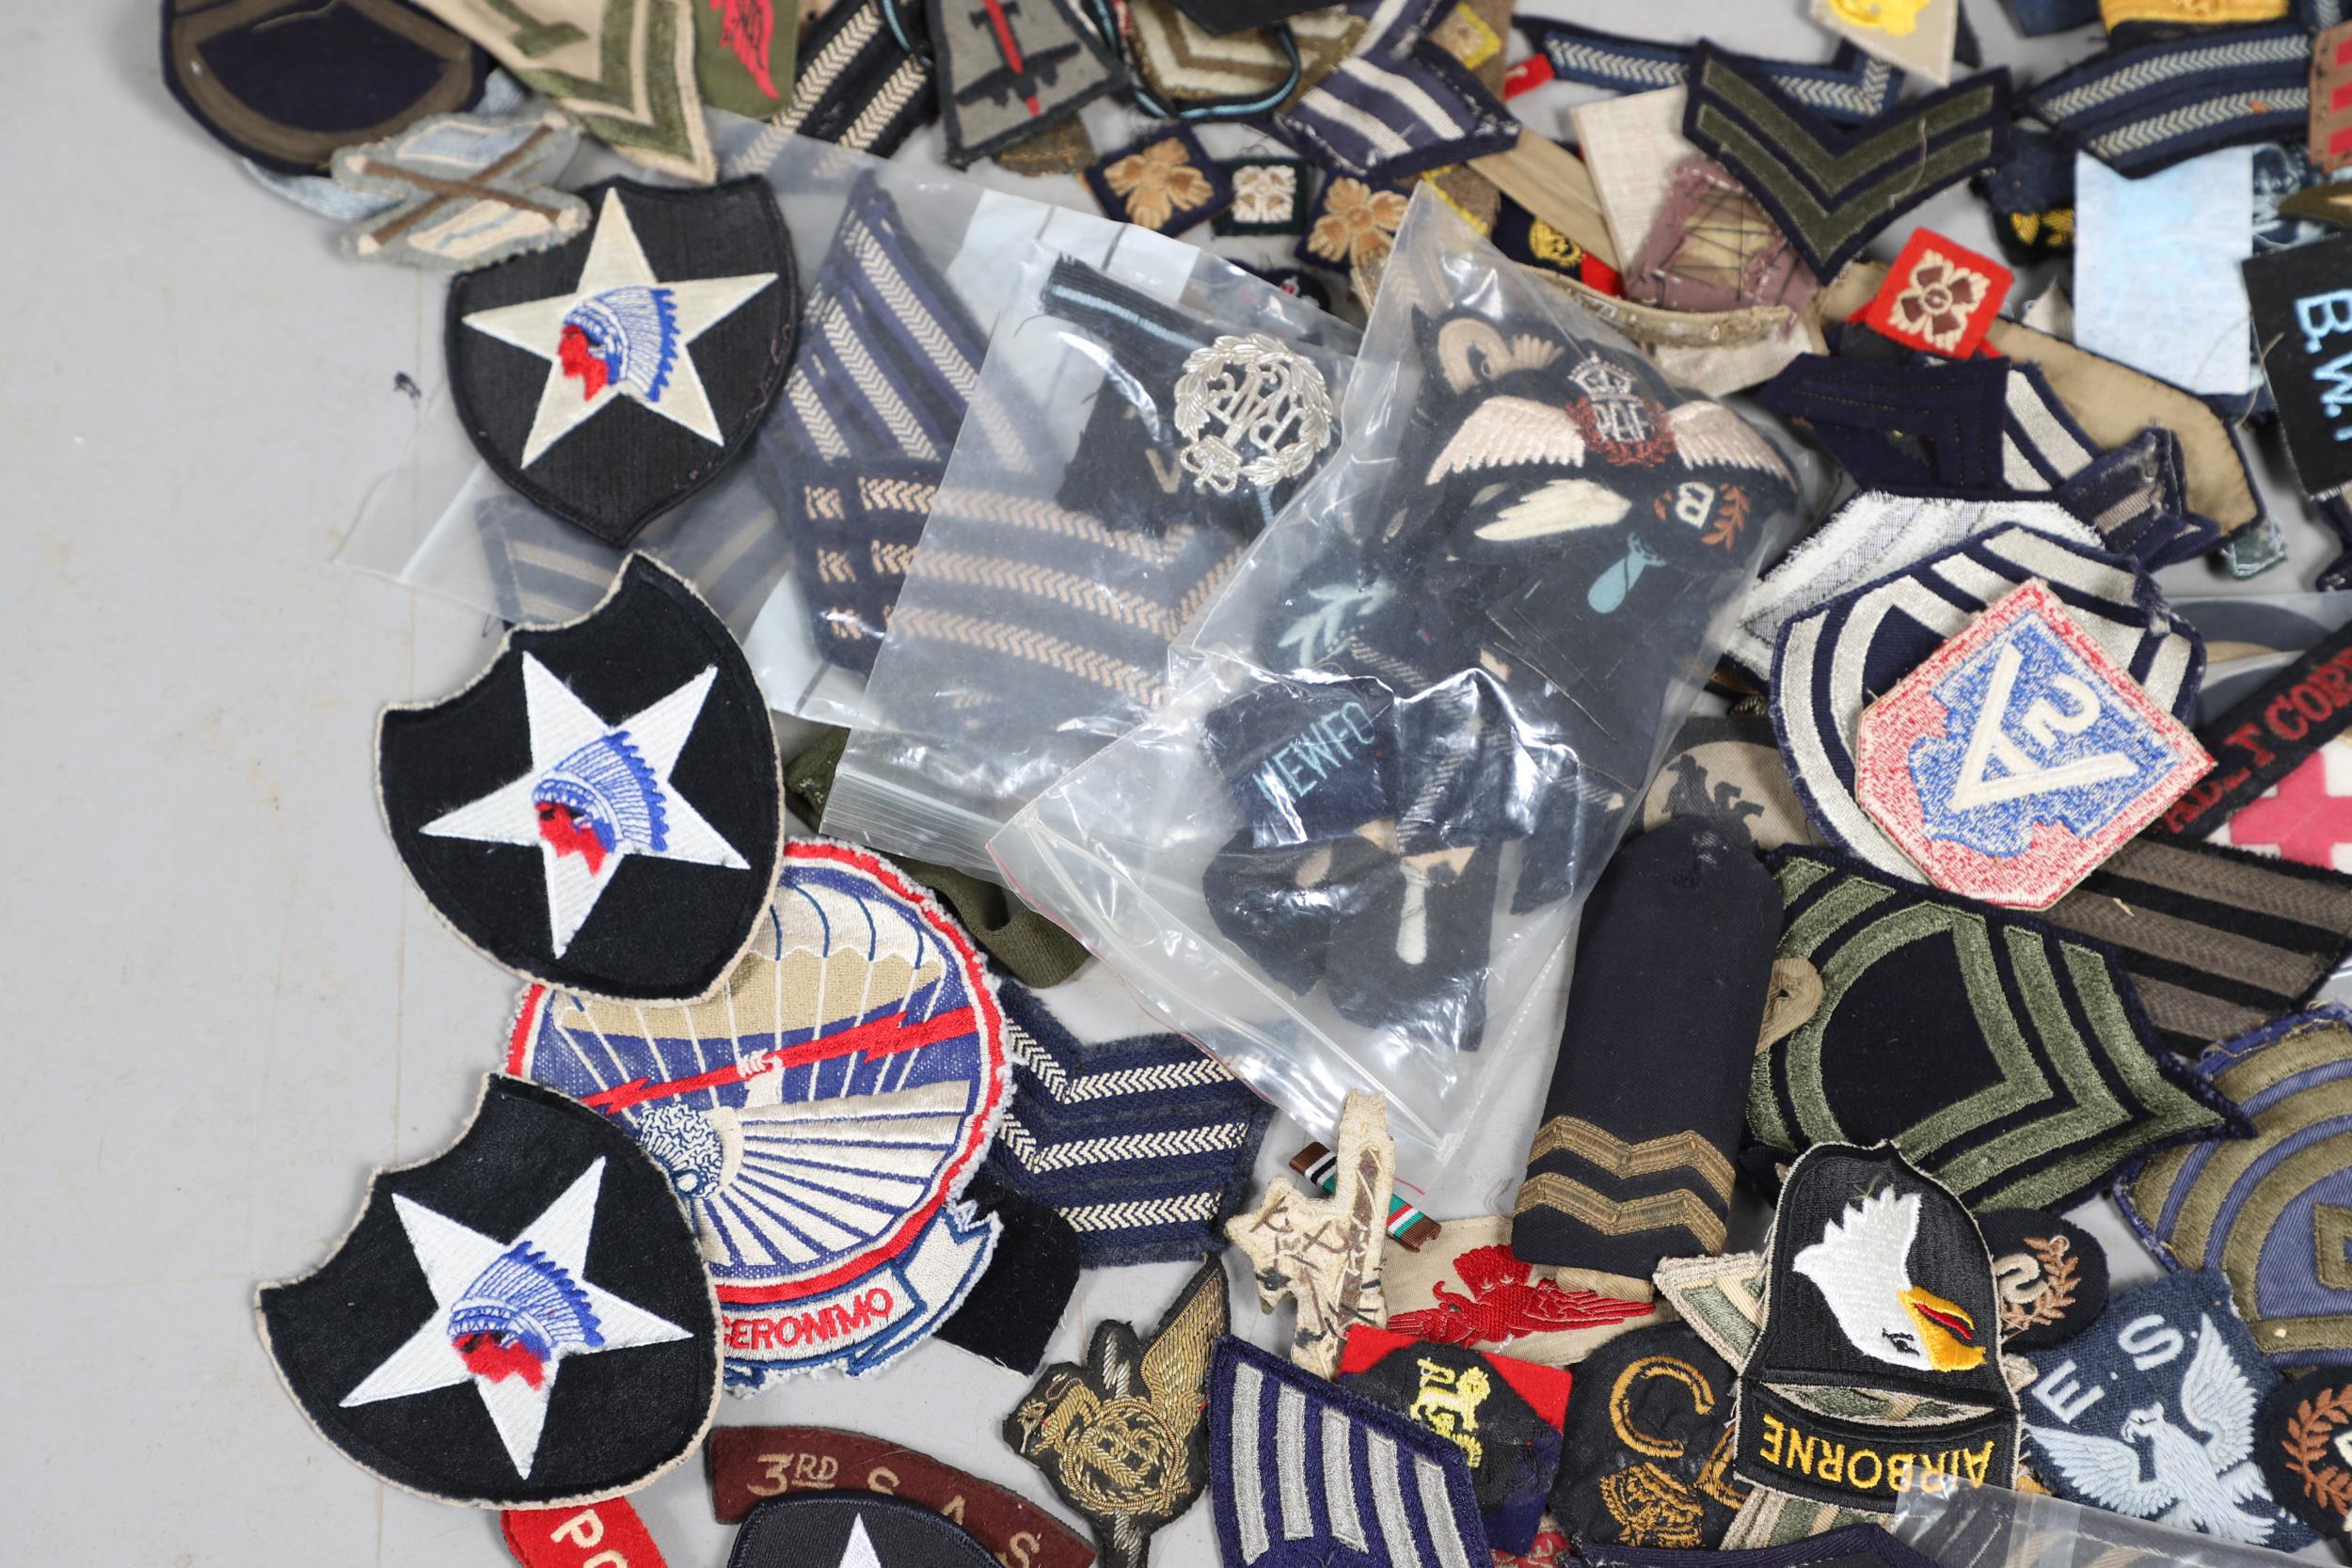 AN EXTENSIVE COLLECTION OF ARMY AND AIR FORCE UNIFORM PATCHES AND RANK INSIGNIA. - Image 6 of 14